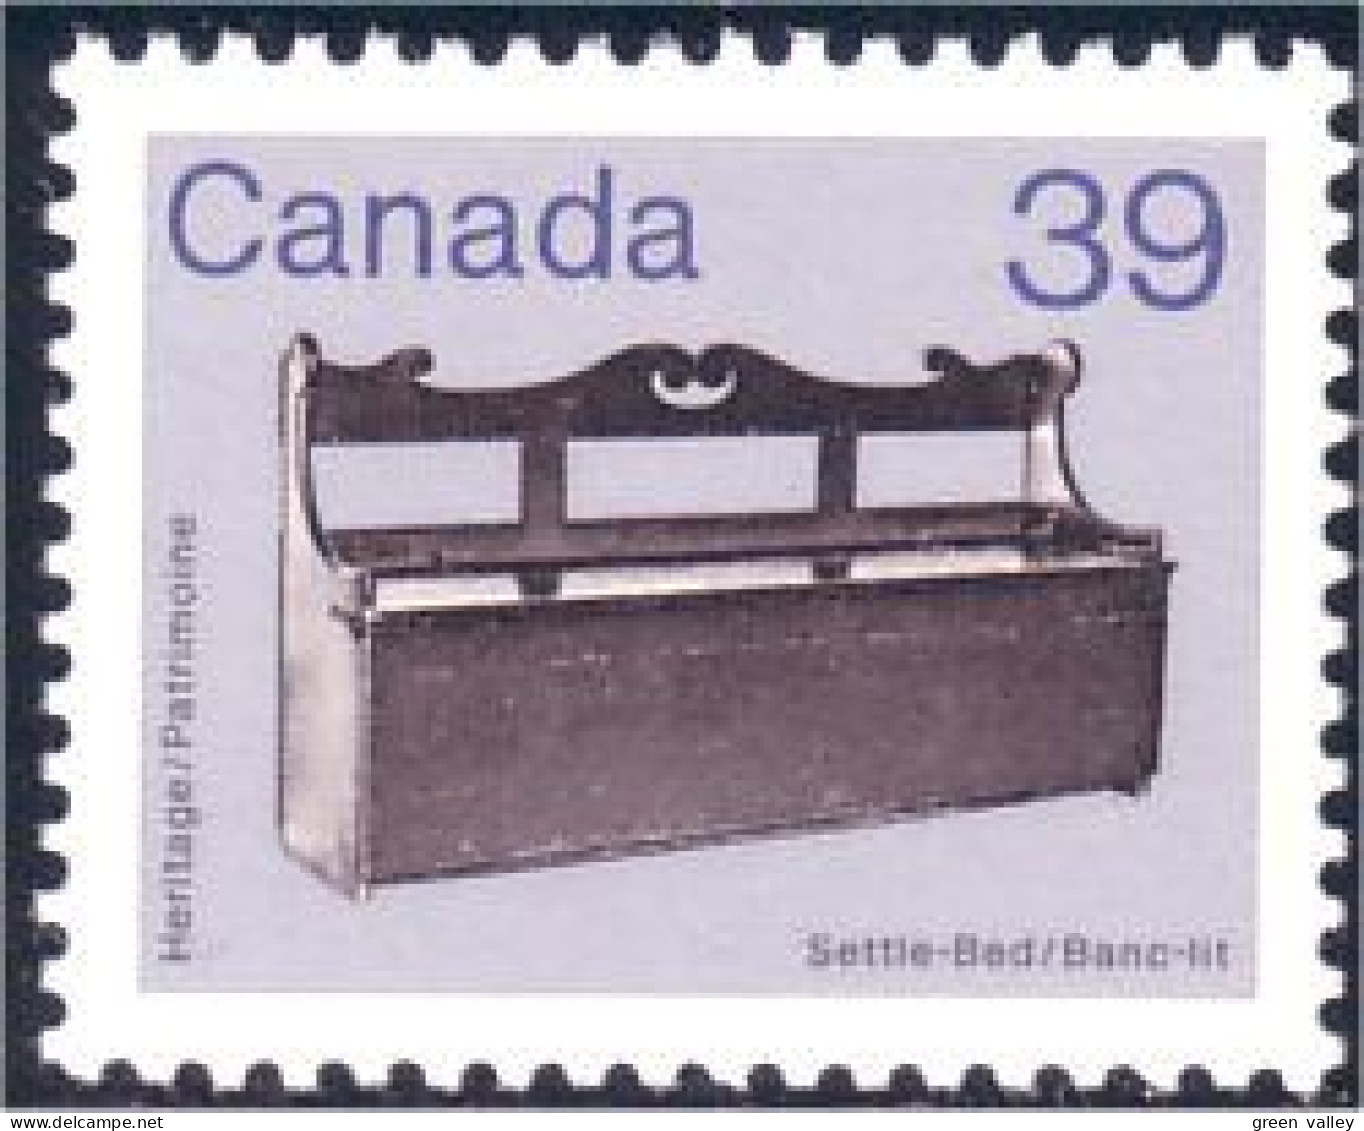 (C09-28a) Canada Settle-bed Banc Lit MNH ** Neuf SC - Unused Stamps